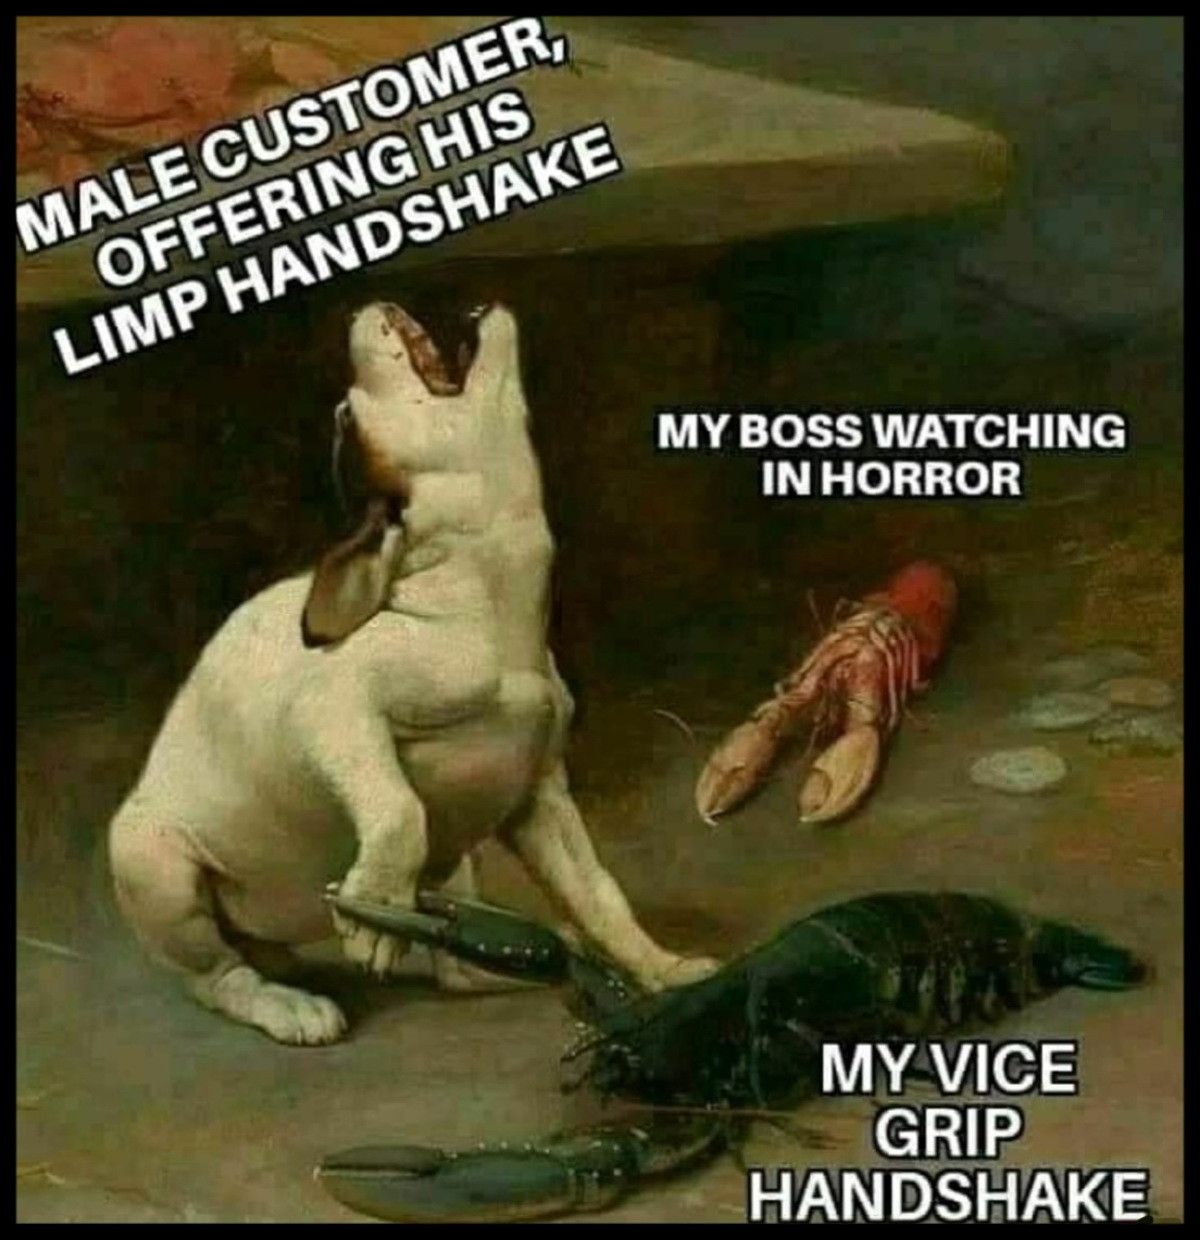 give em the firm handshake son